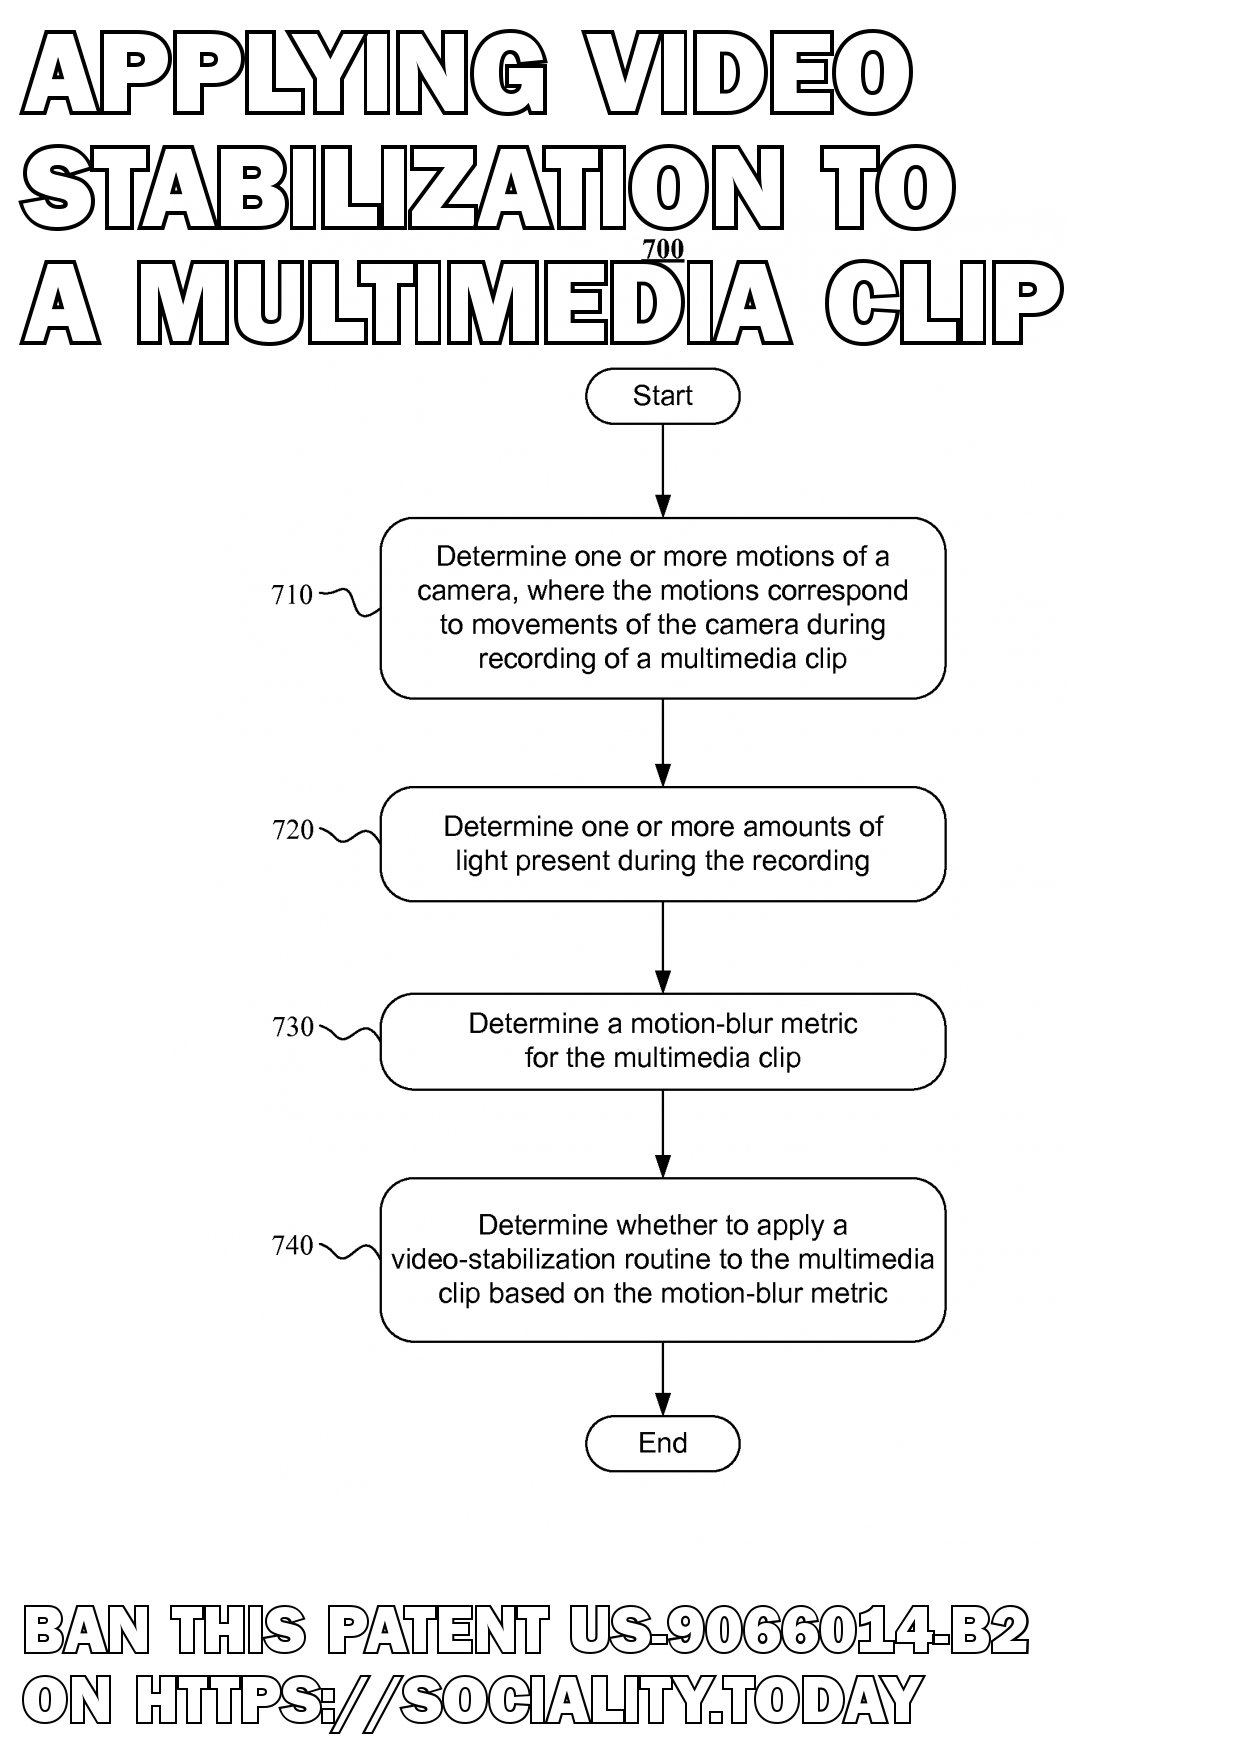 Applying video stabilization to a multimedia clip  - US-9066014-B2